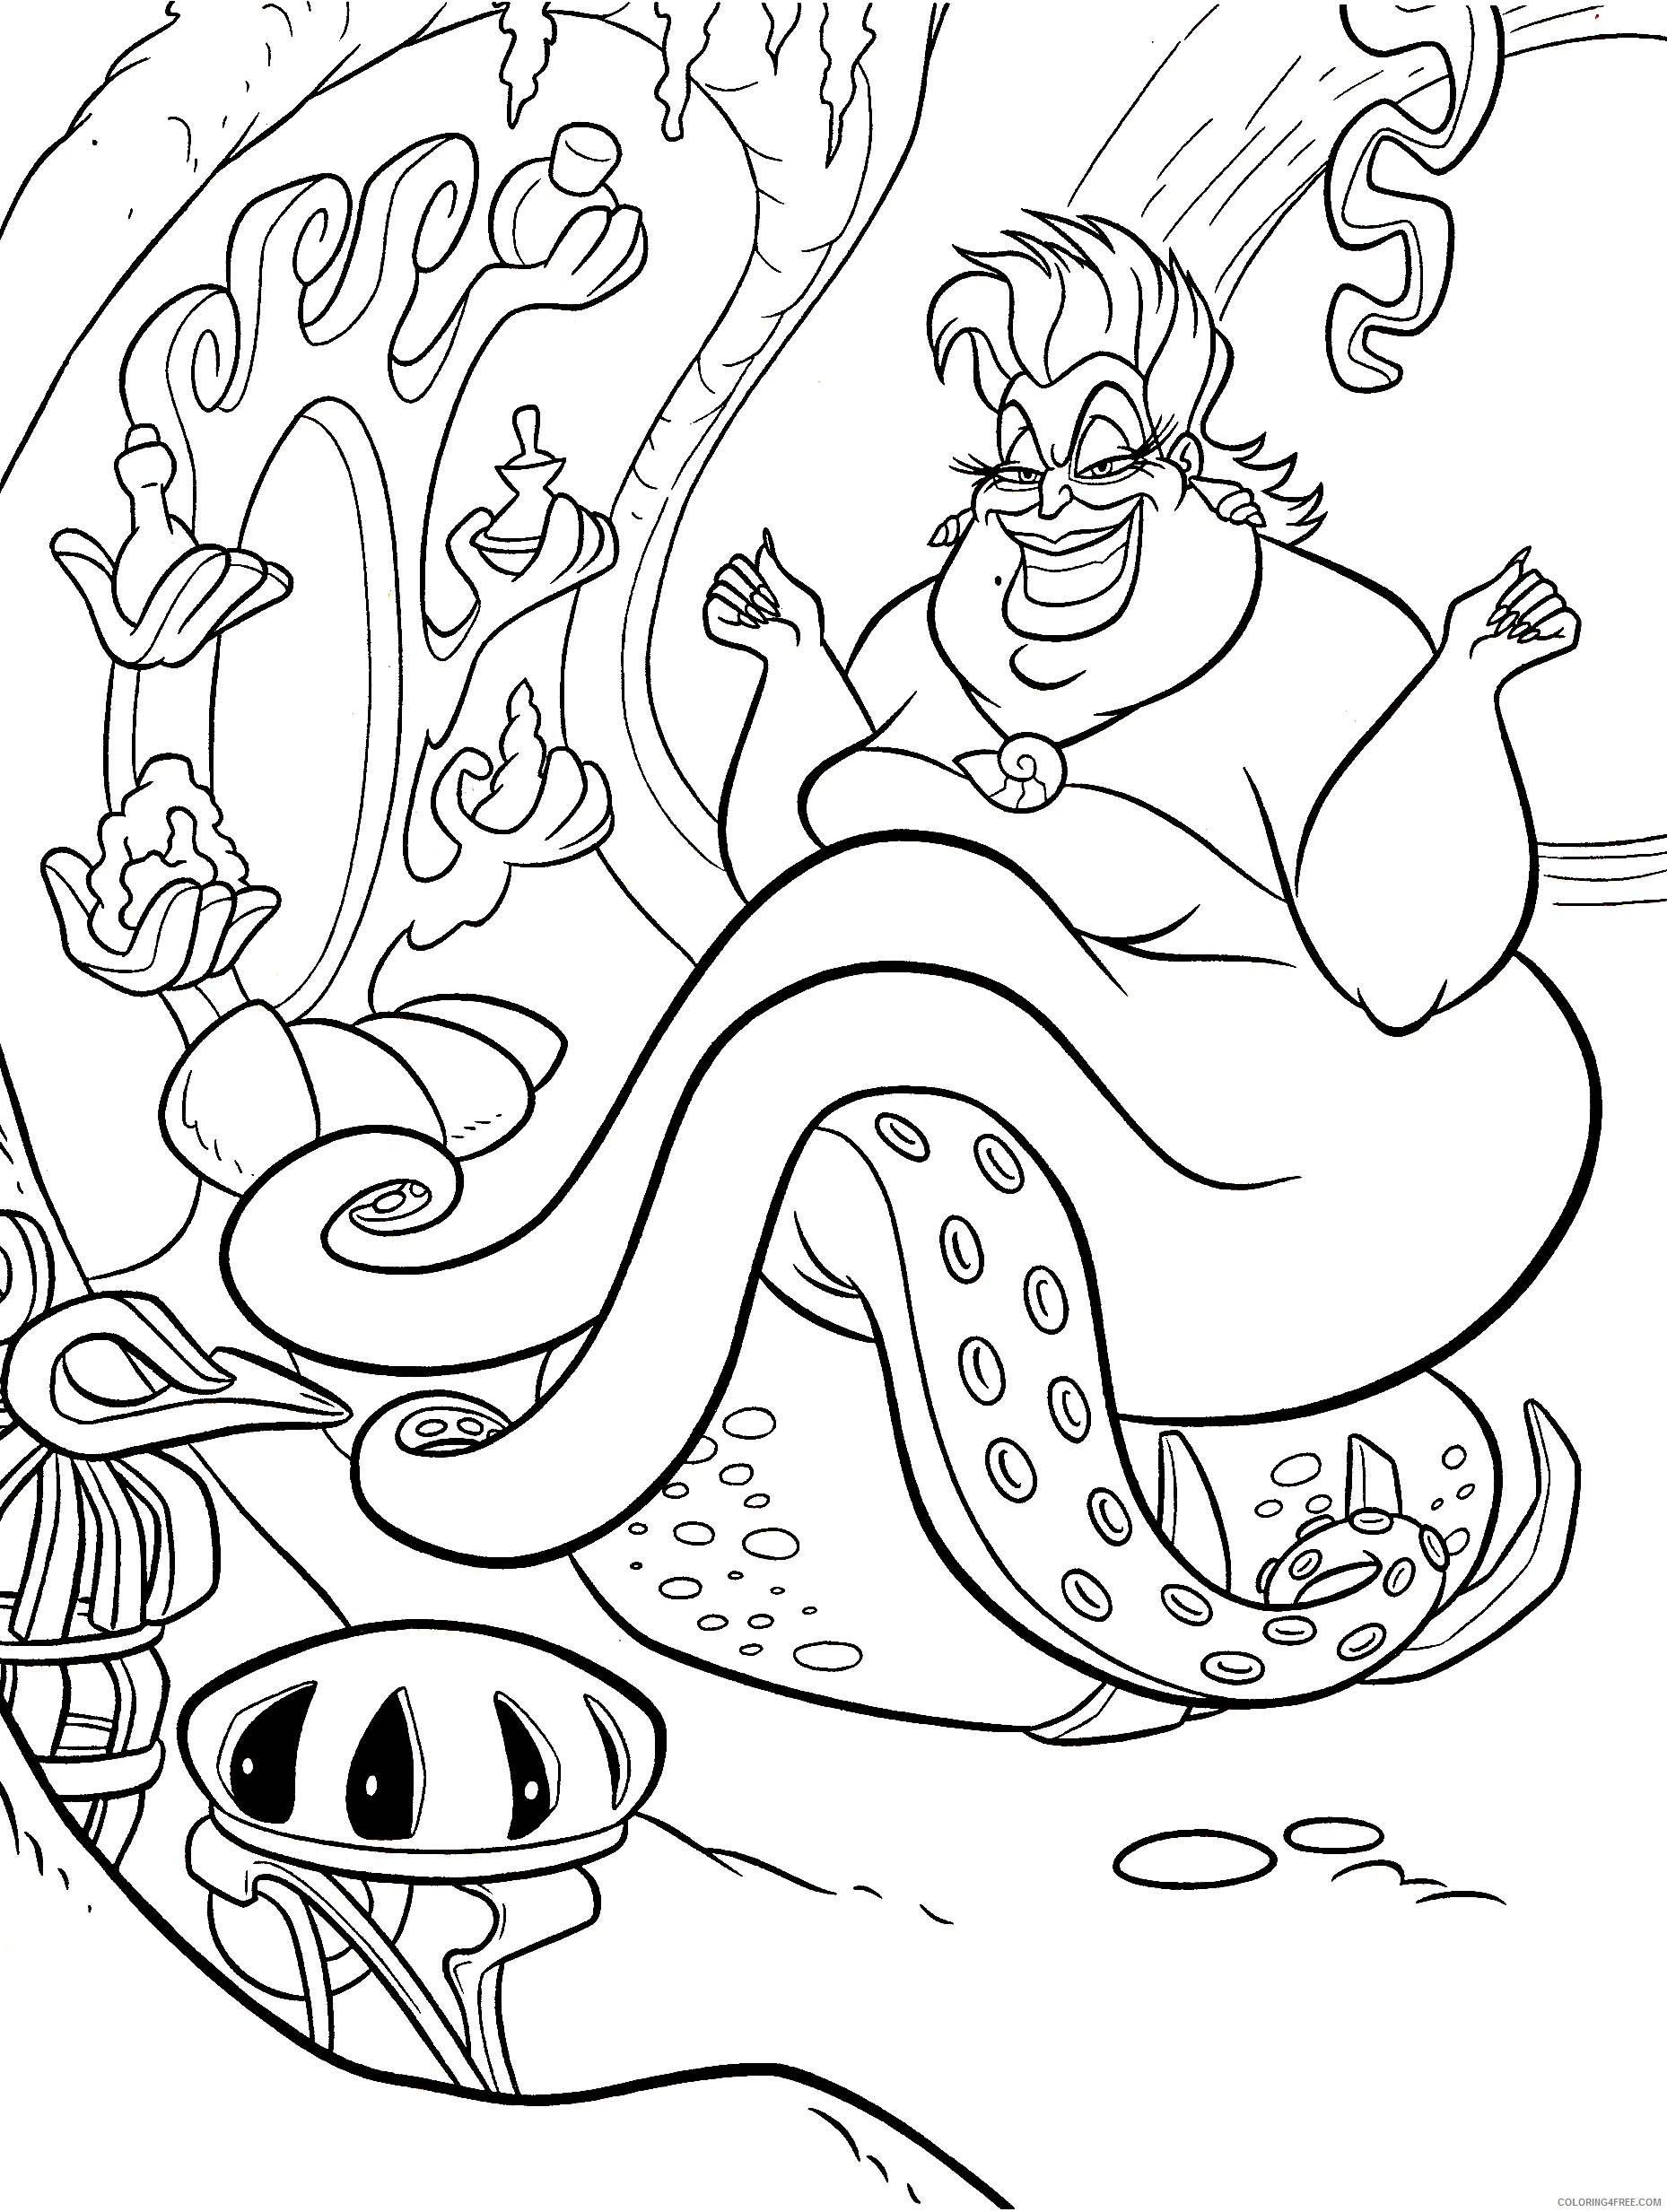 ursula little mermaid coloring pages Coloring4free